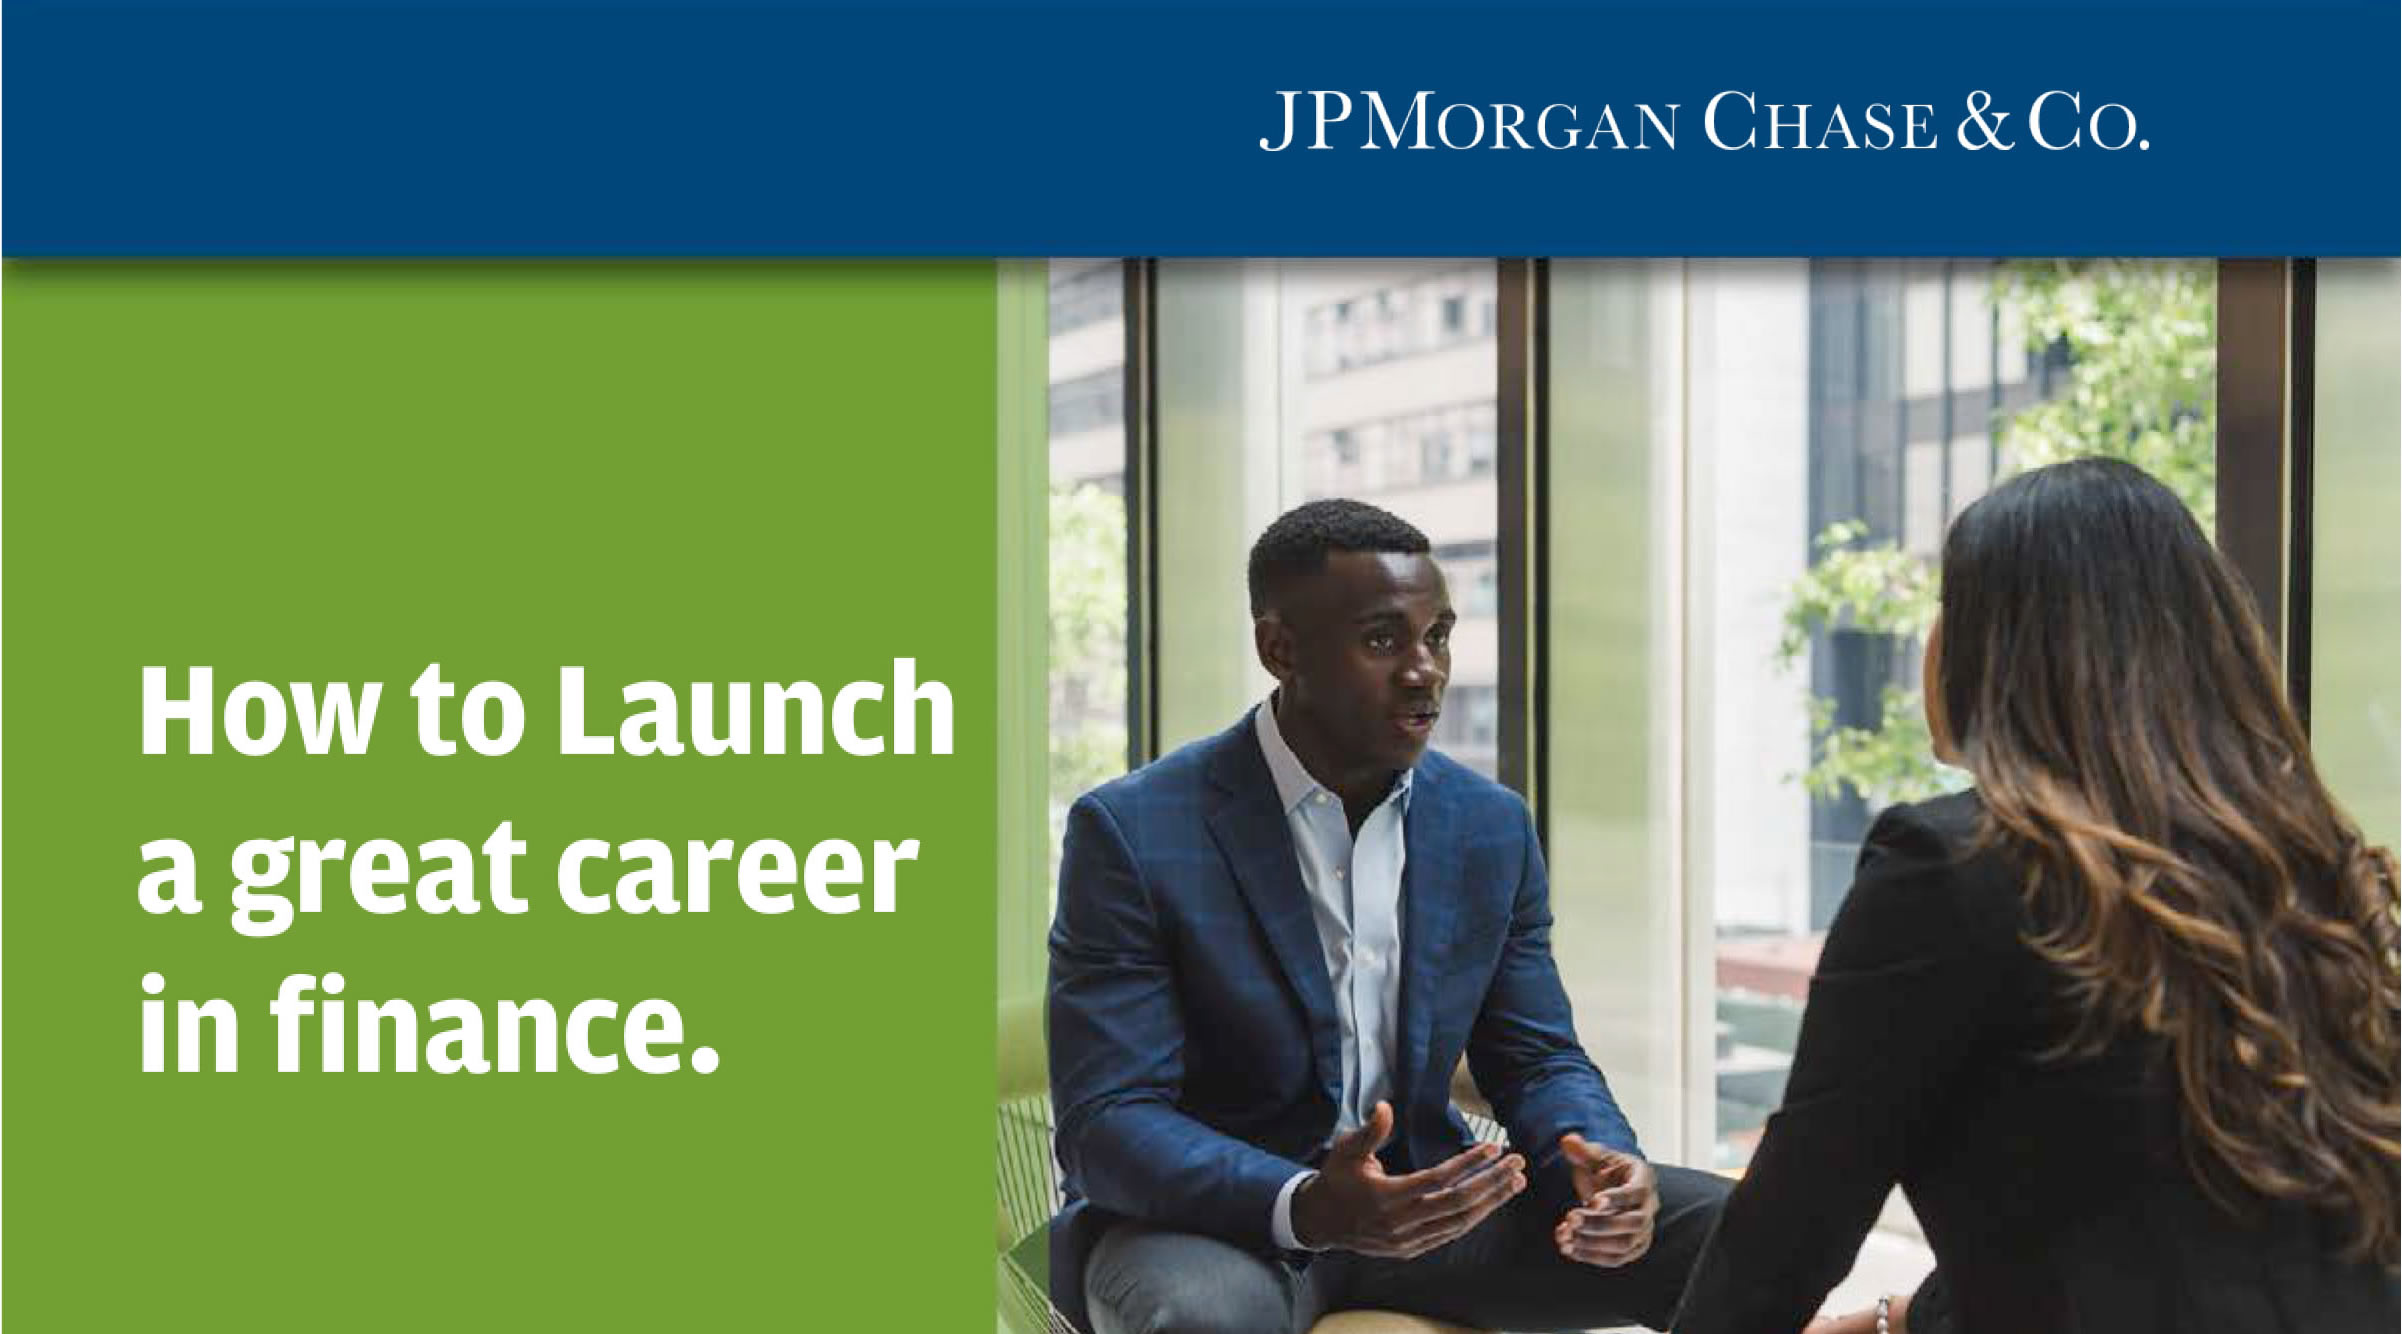 JPMorgan Chase & Co Takeover day at Delaware State University